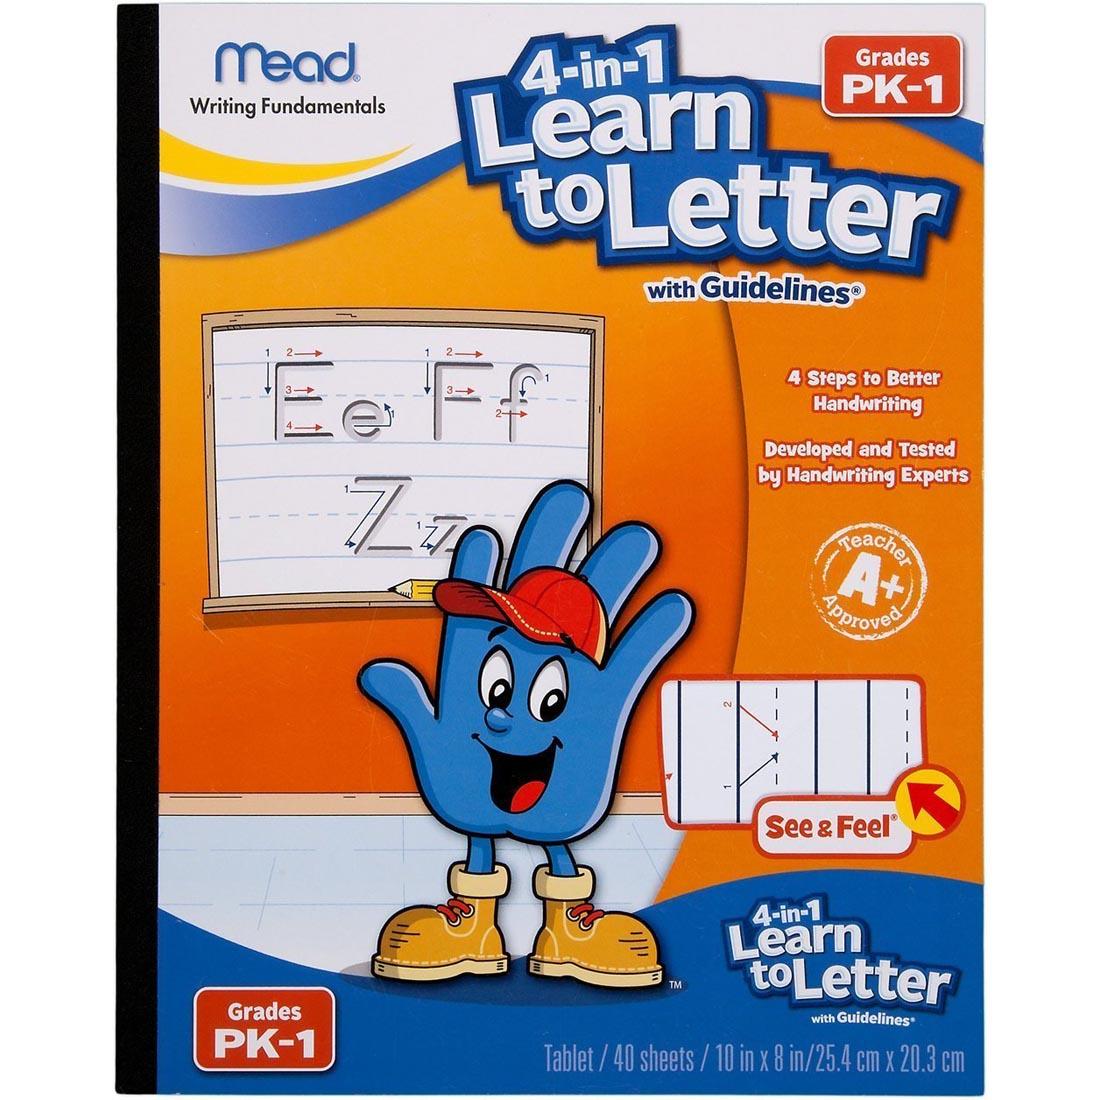 Mead Writing Fundamentals 4-in-1 Learn To Letter With Guidelines